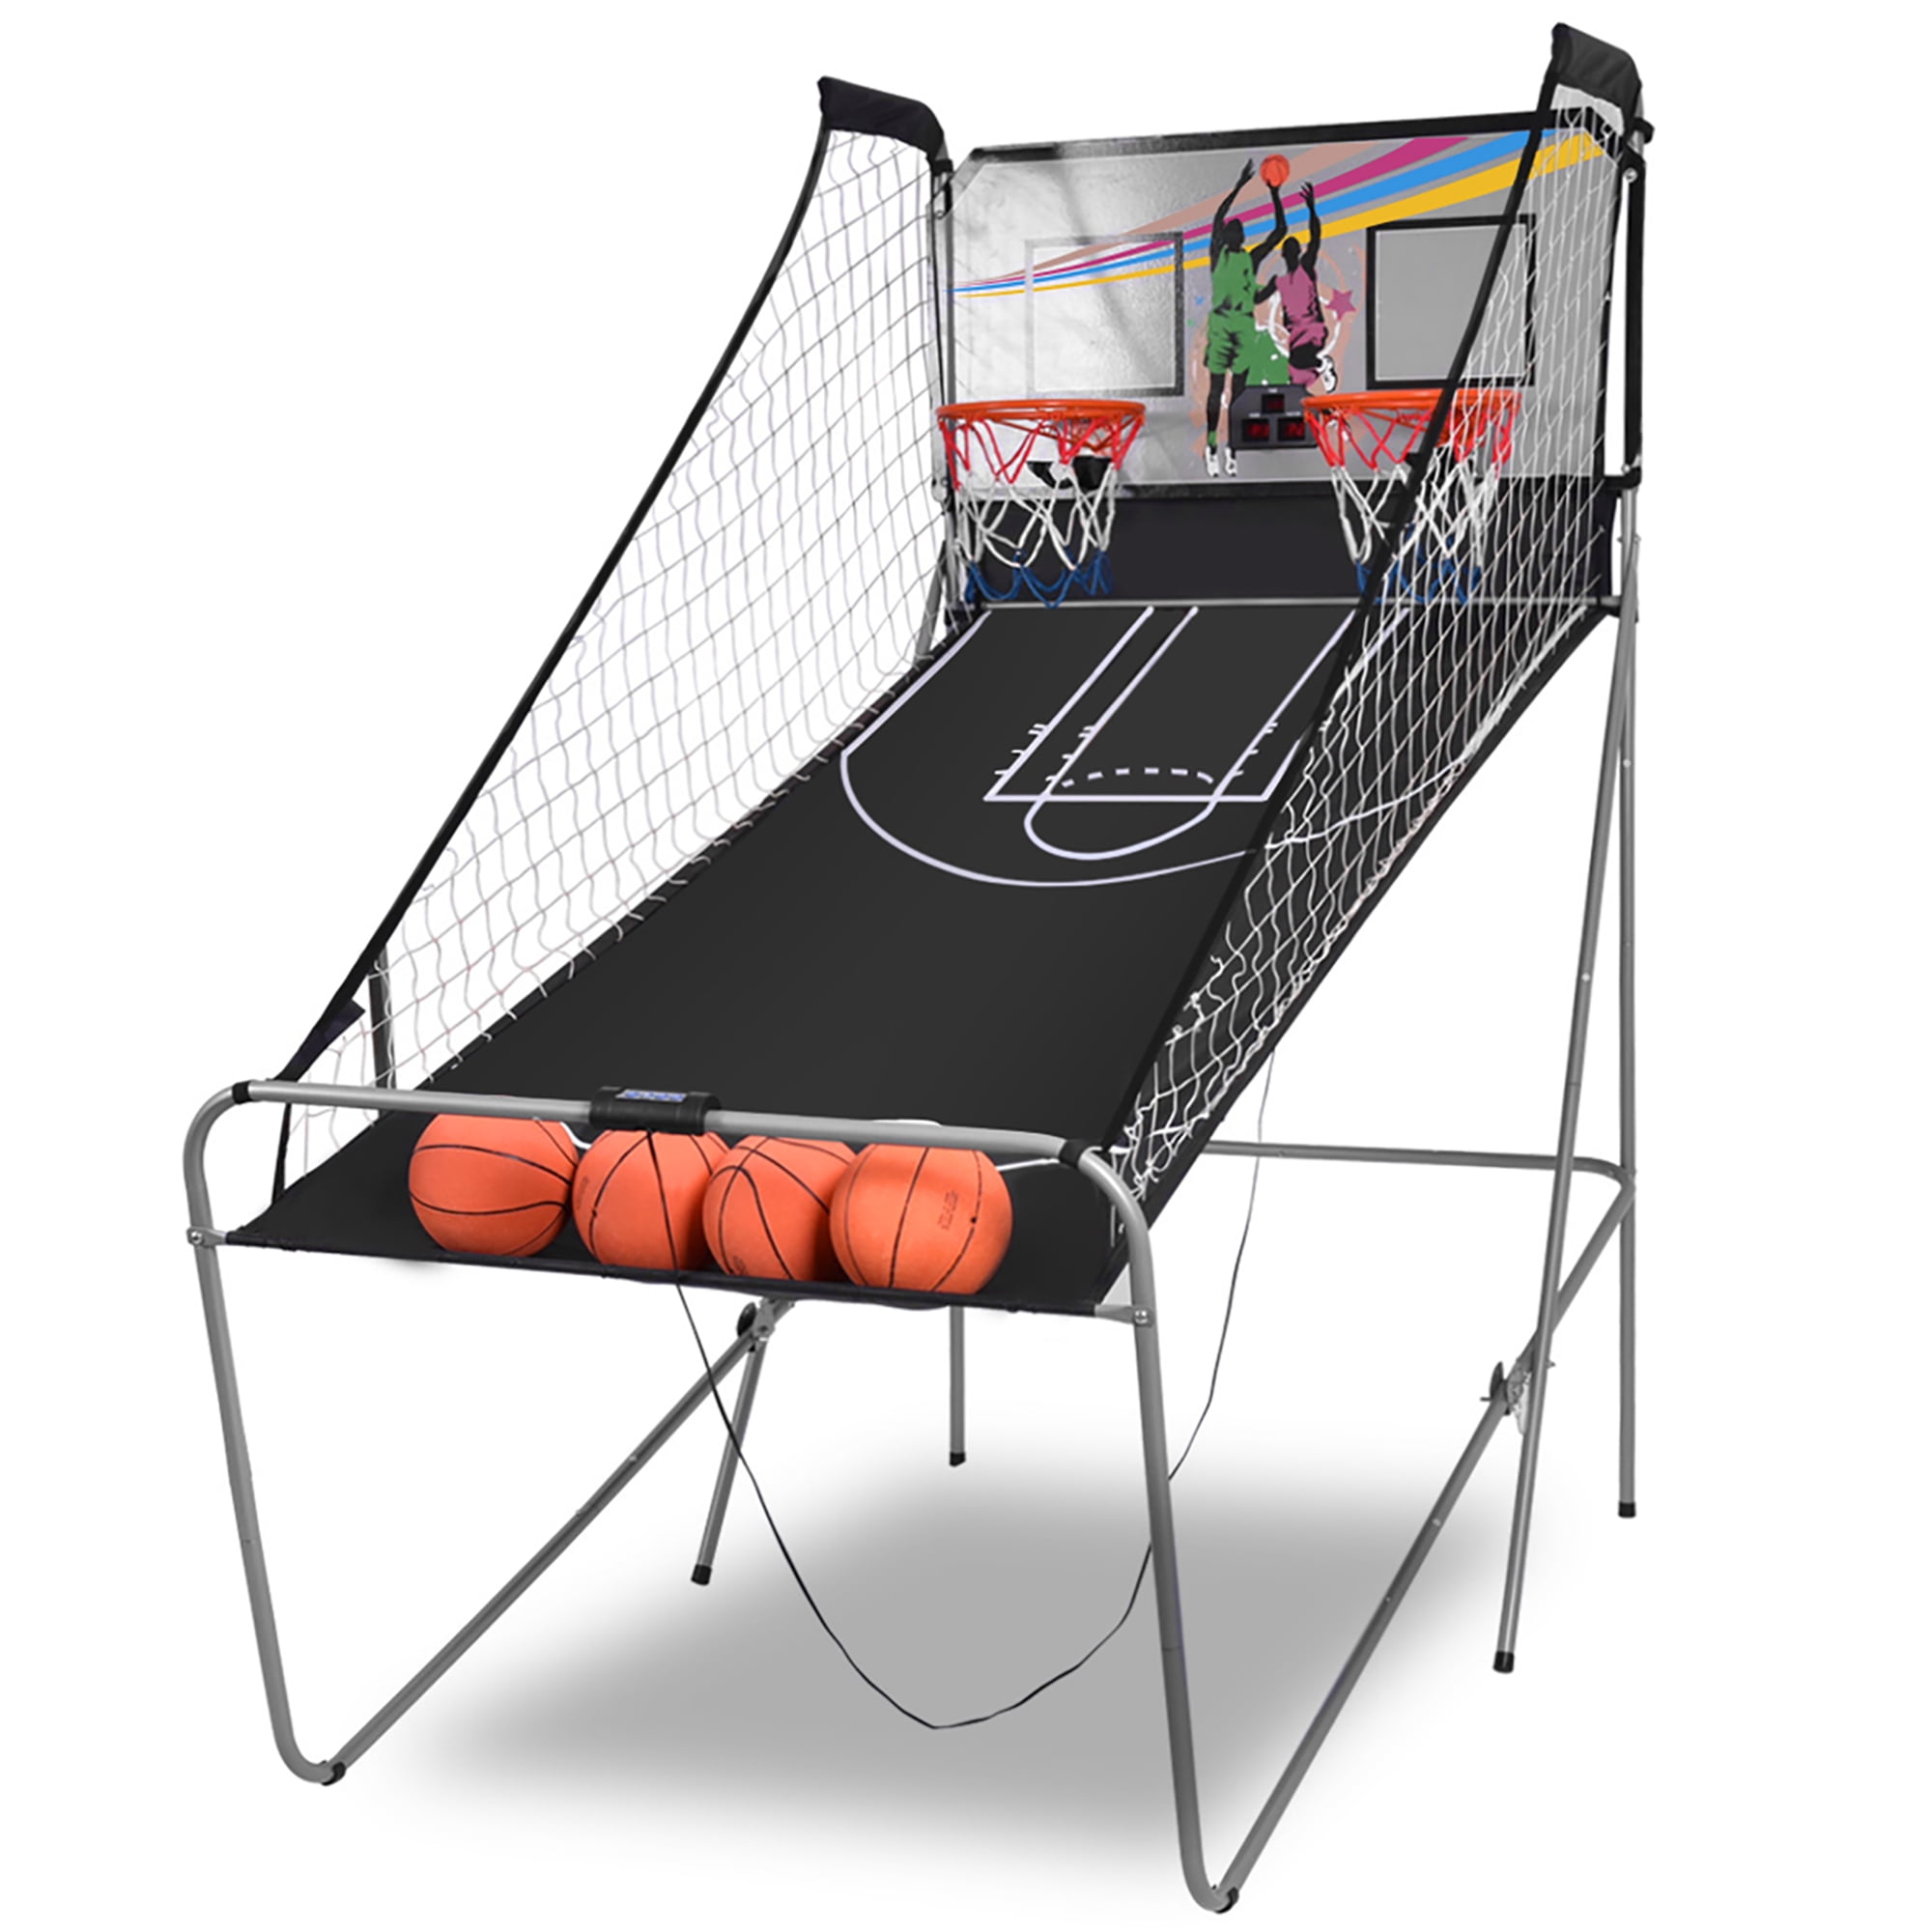 Indoor Basketball Arcade Game Double Electronic Hoops Shot 2 Player W/ 4 Balls for sale online 